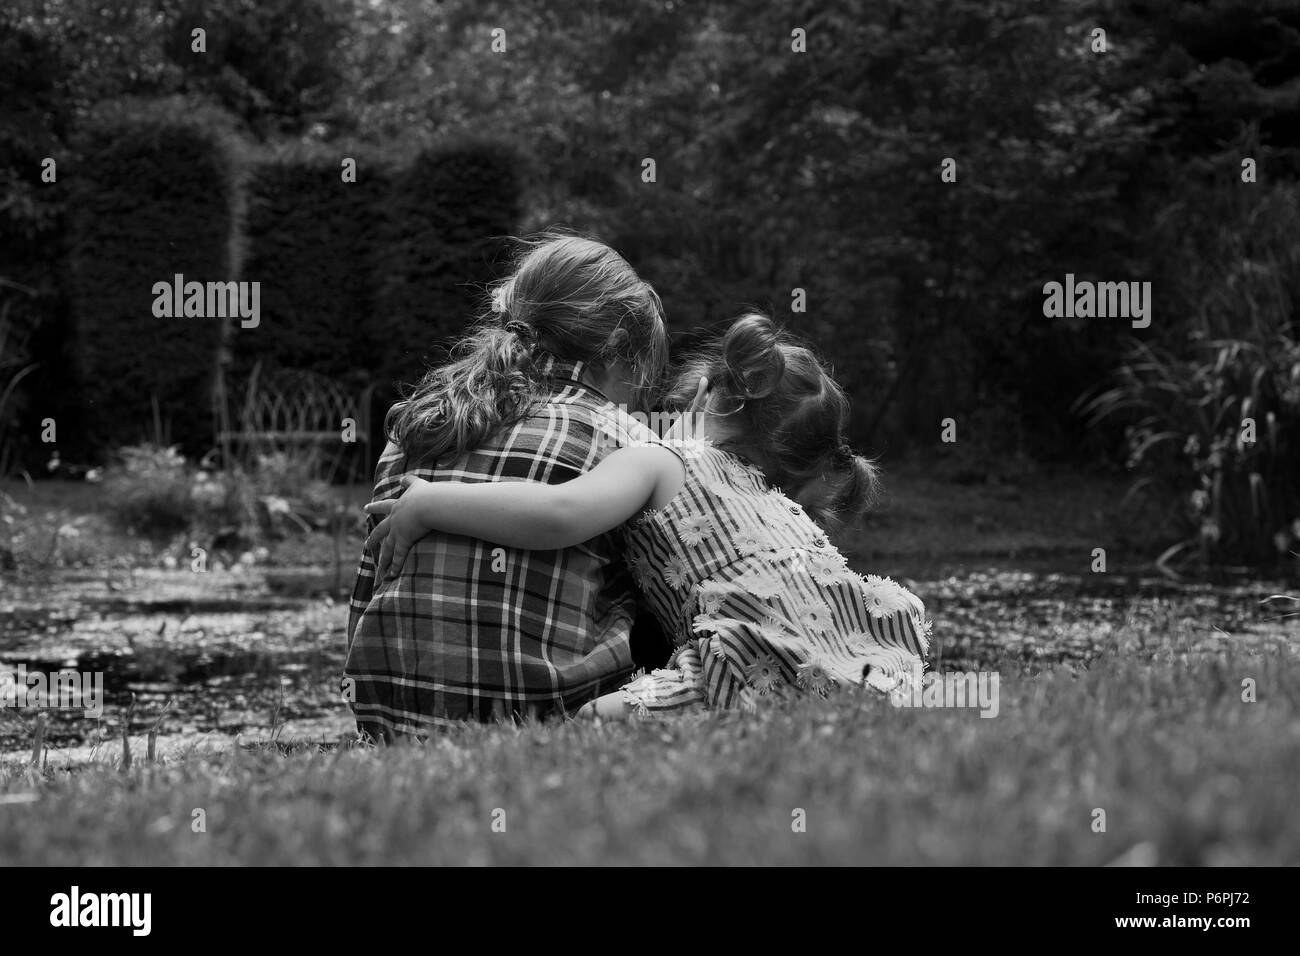 Little girl hugging her friend by a pond. Stock Photo